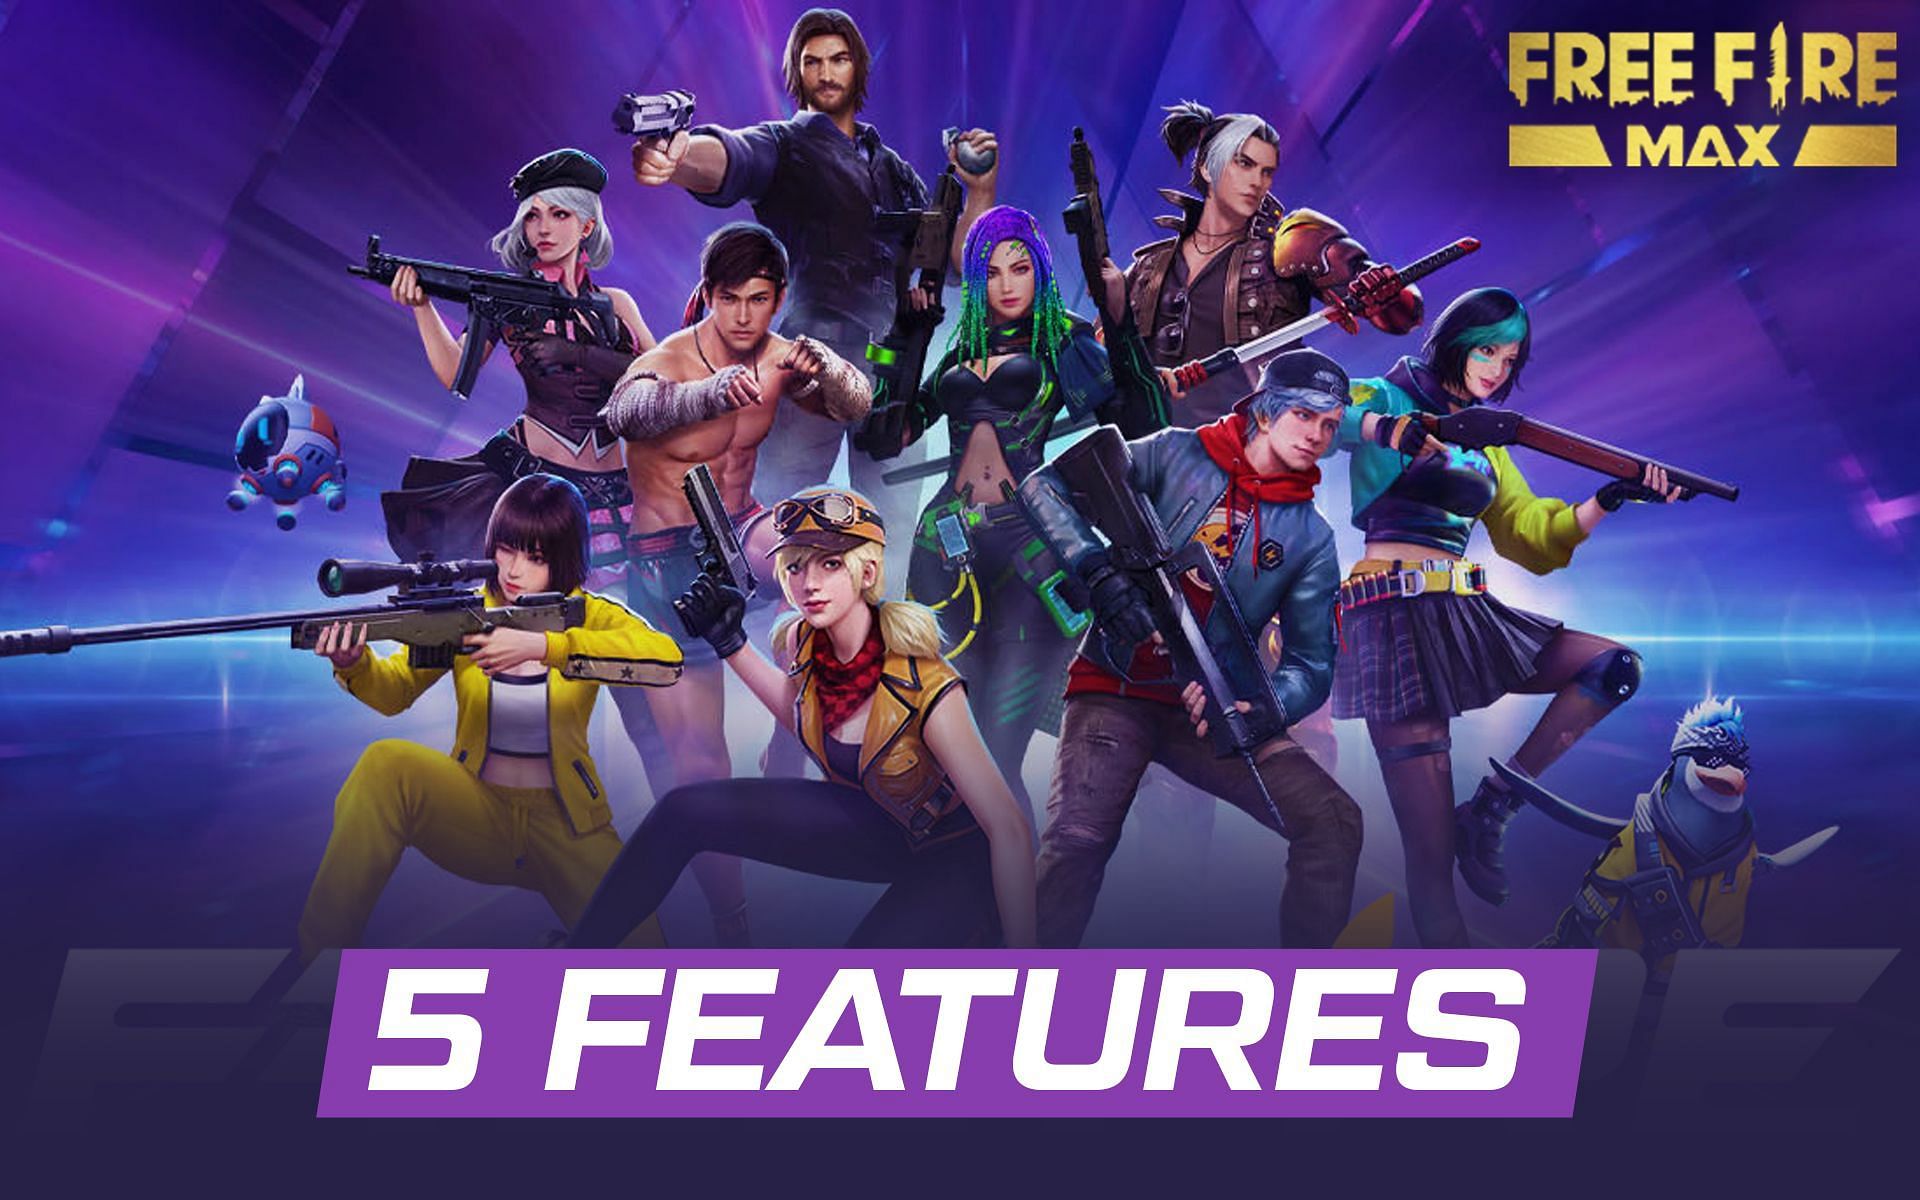 Top 5 features of the new OB35 update of Free Fire MAX (Image via Sportskeeda)